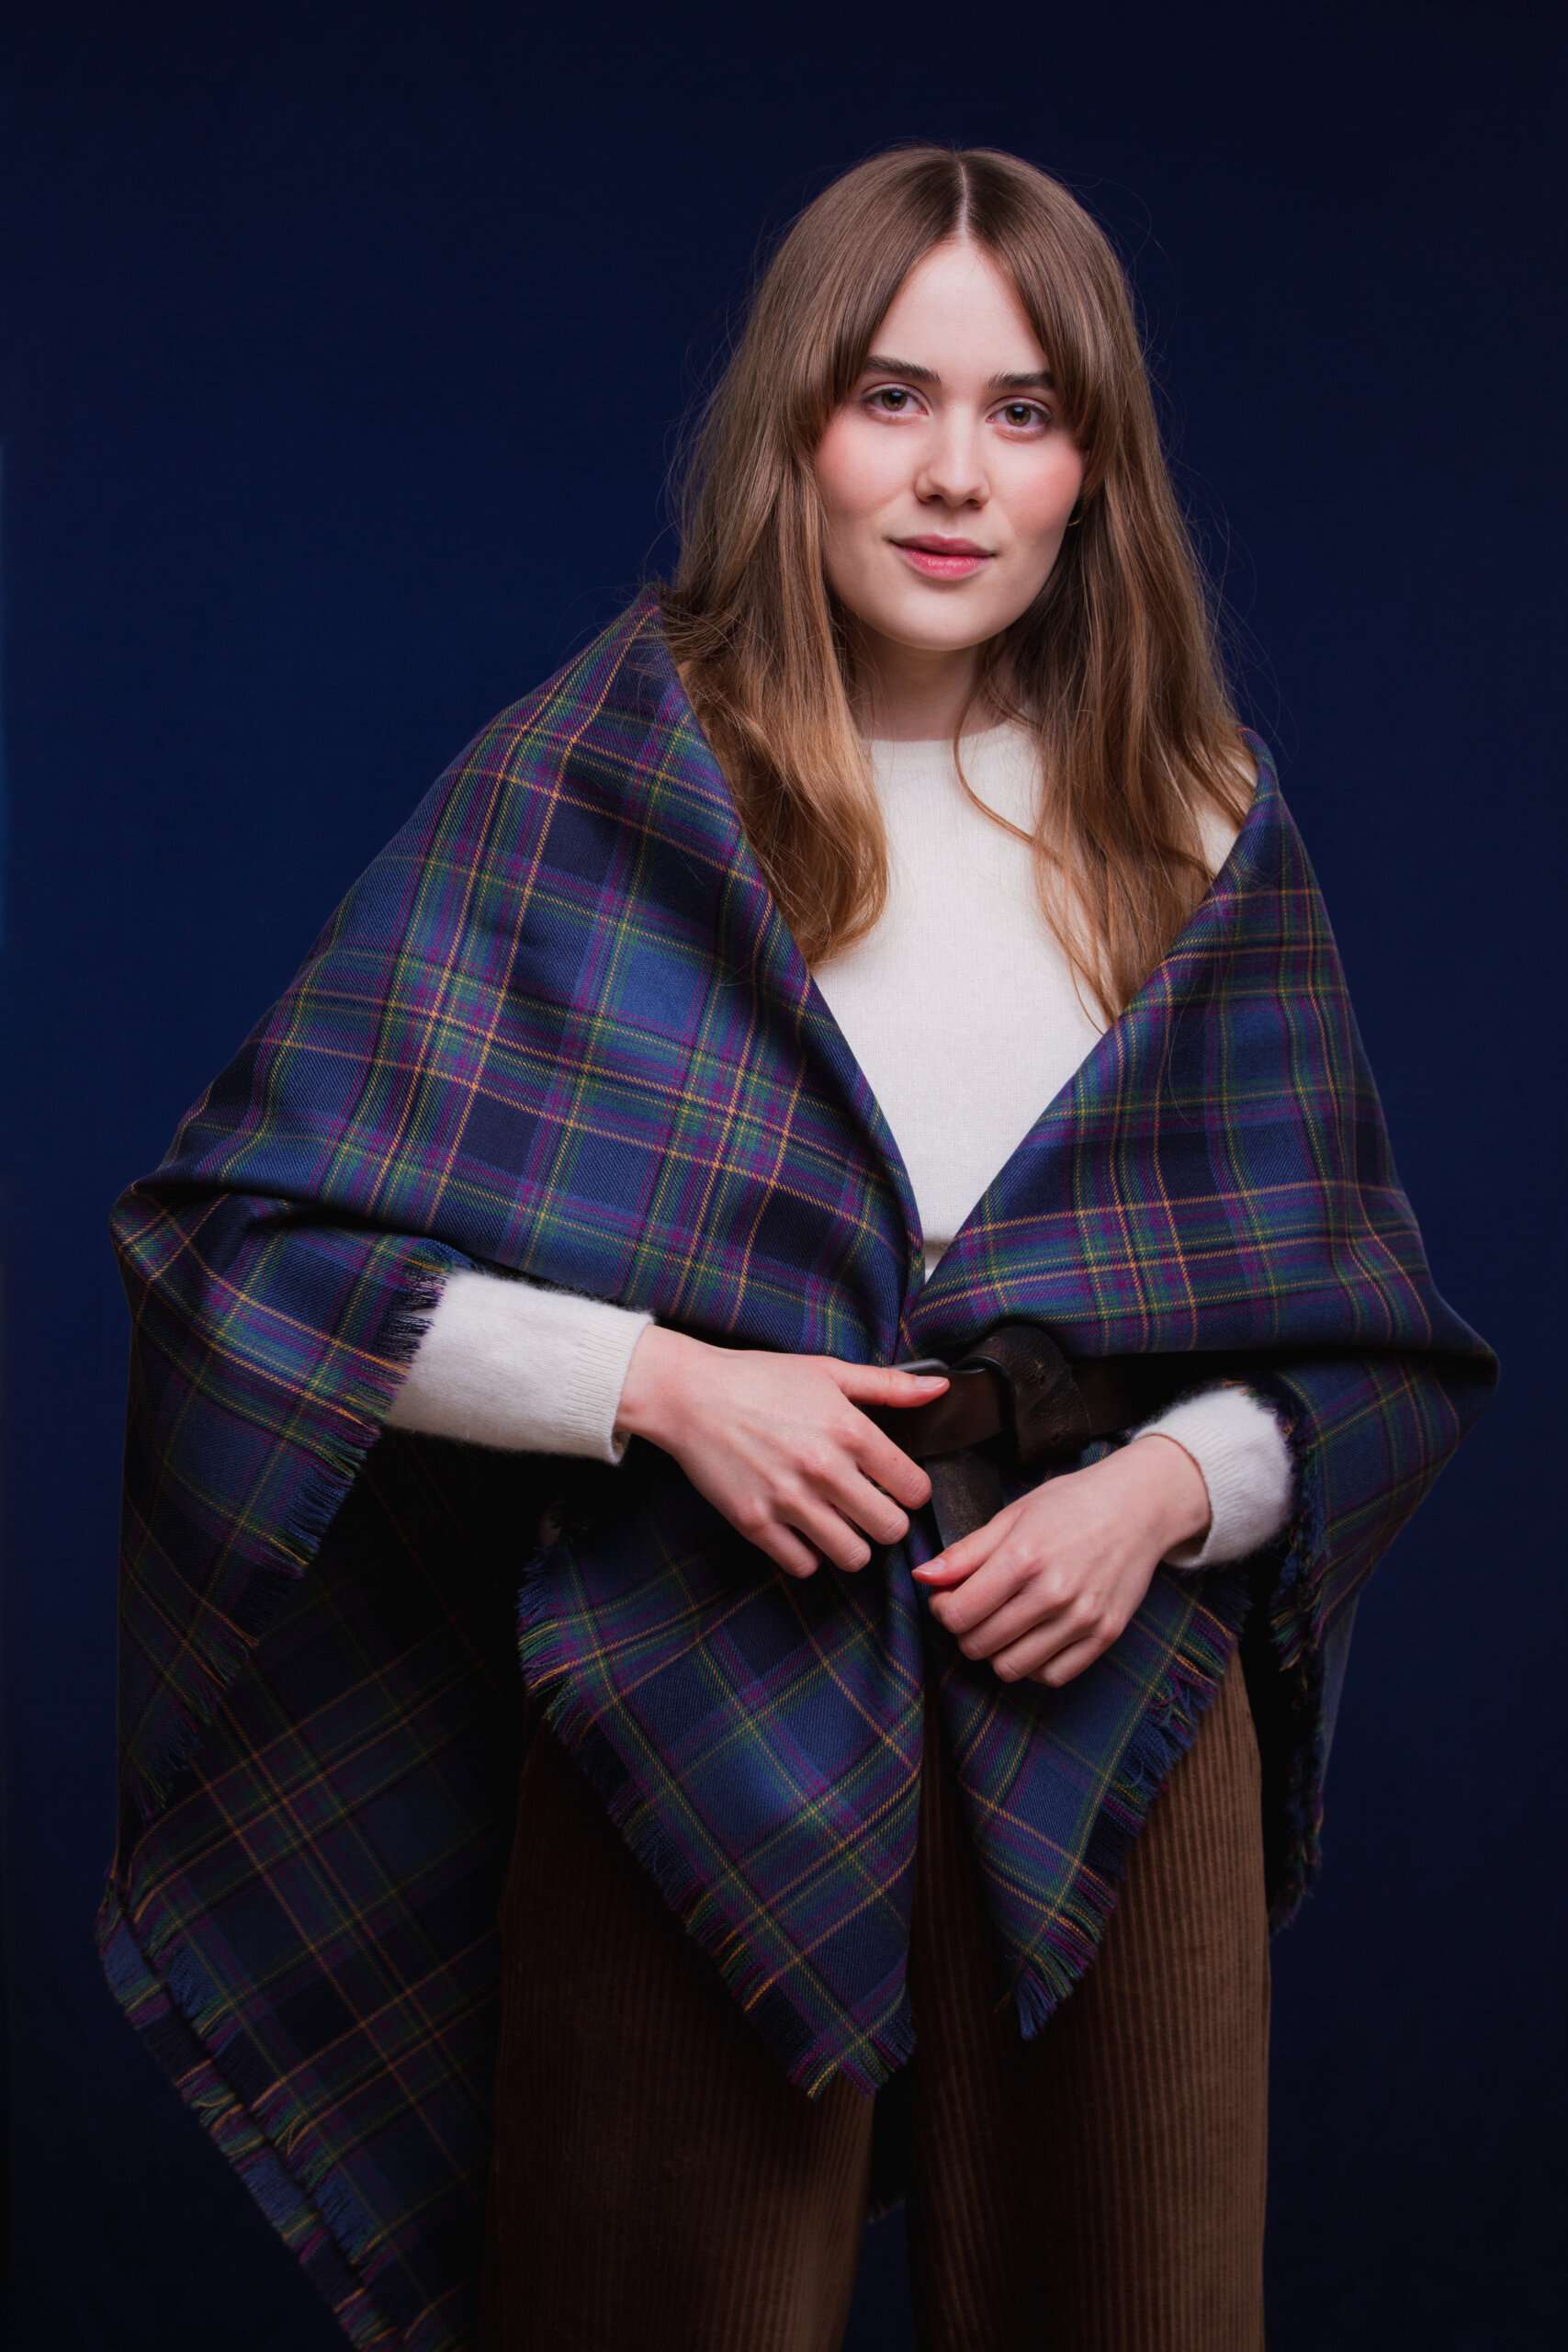 LoullyMakes Studio 4 49 scaled Classic square shawl in our own exclusive Flodden Commemorative mediumweight 13oz 100% wool tartan. This generously large shawl measures approx 145cm square and can be worn so many ways ,offering inherent insulating warmth without bulkiness- drape it , wrap it , tie it, belt it , pin it - the styling possibilities are endless. Always a comfortable accessory.